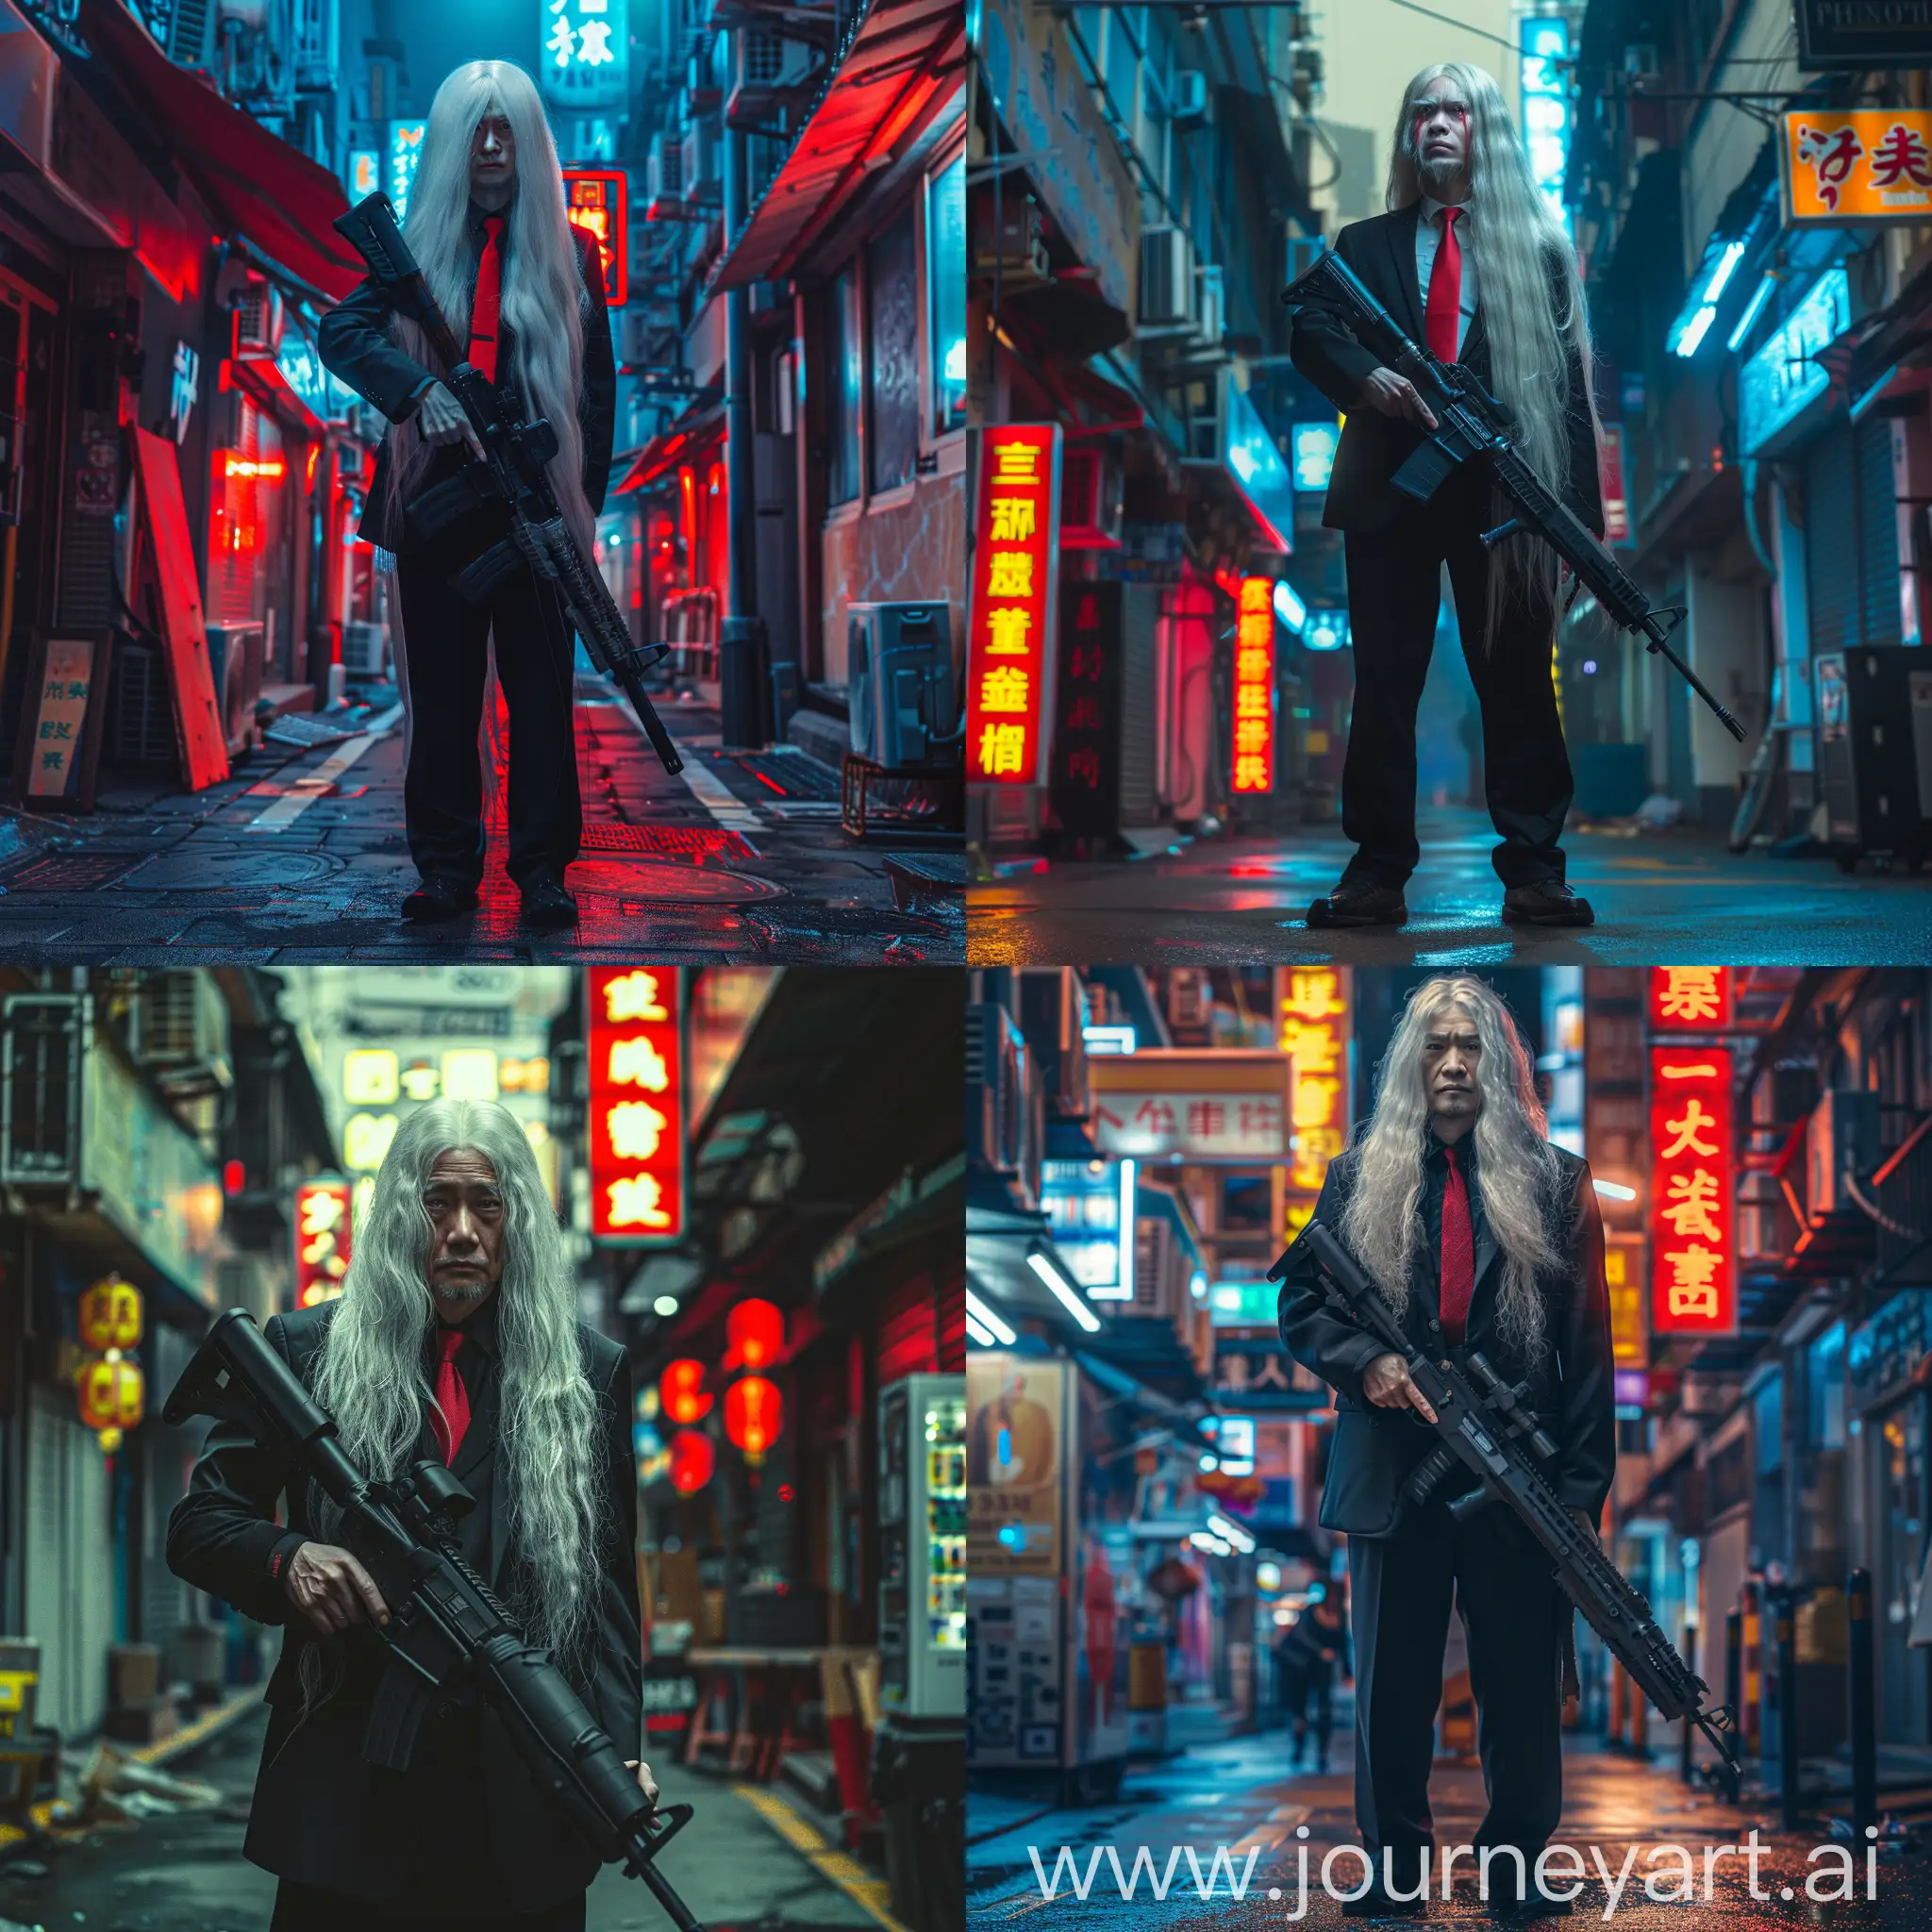 Cyberpunk-Assassin-GrayWhite-Haired-Man-with-Assault-Rifle-on-Futuristic-Street